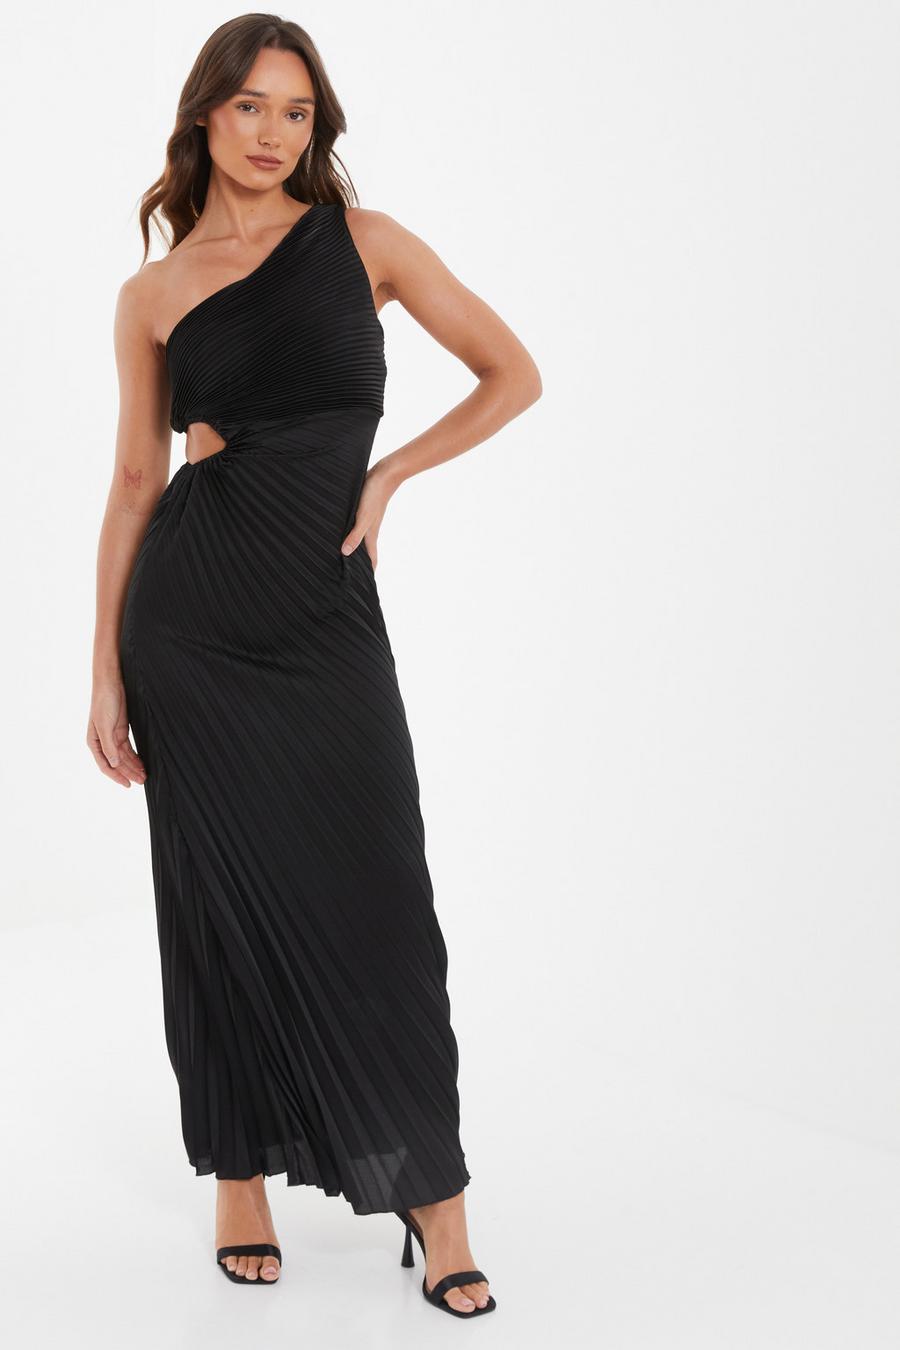 18+ One Shoulder Pleated Dress